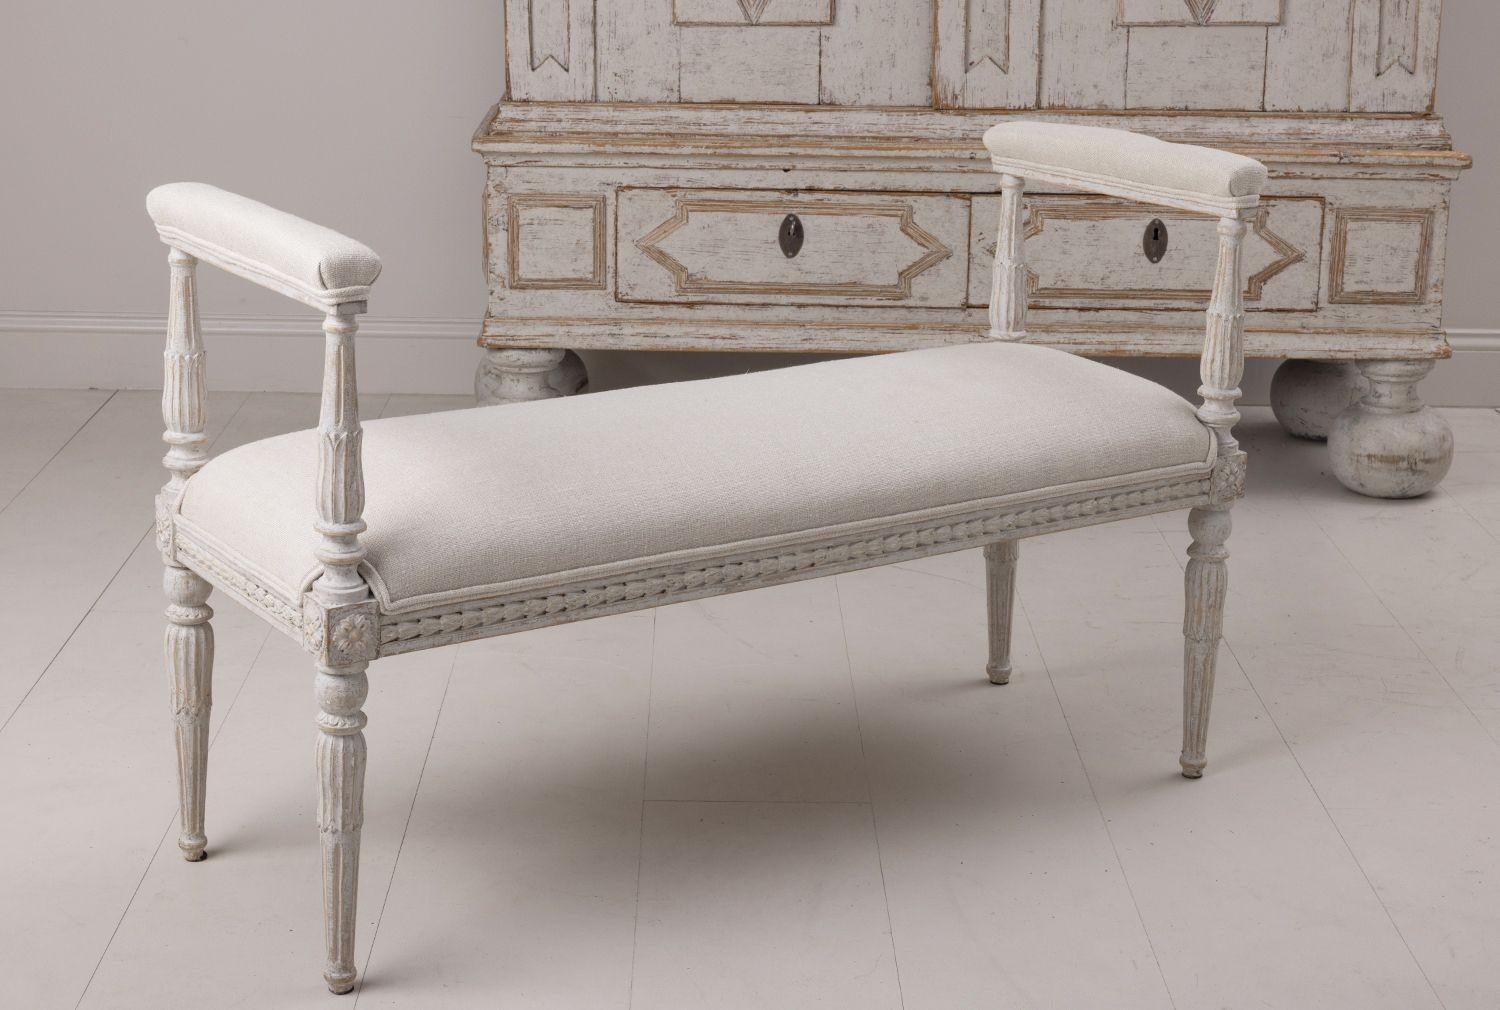 A rare Swedish window bench in the Gustavian style newly upholstered in fine Belgian linen with padded armrests. The frame features beautifully carved acanthus leaves and bell flowers with rosettes on the corner posts ending in tapered and fluted